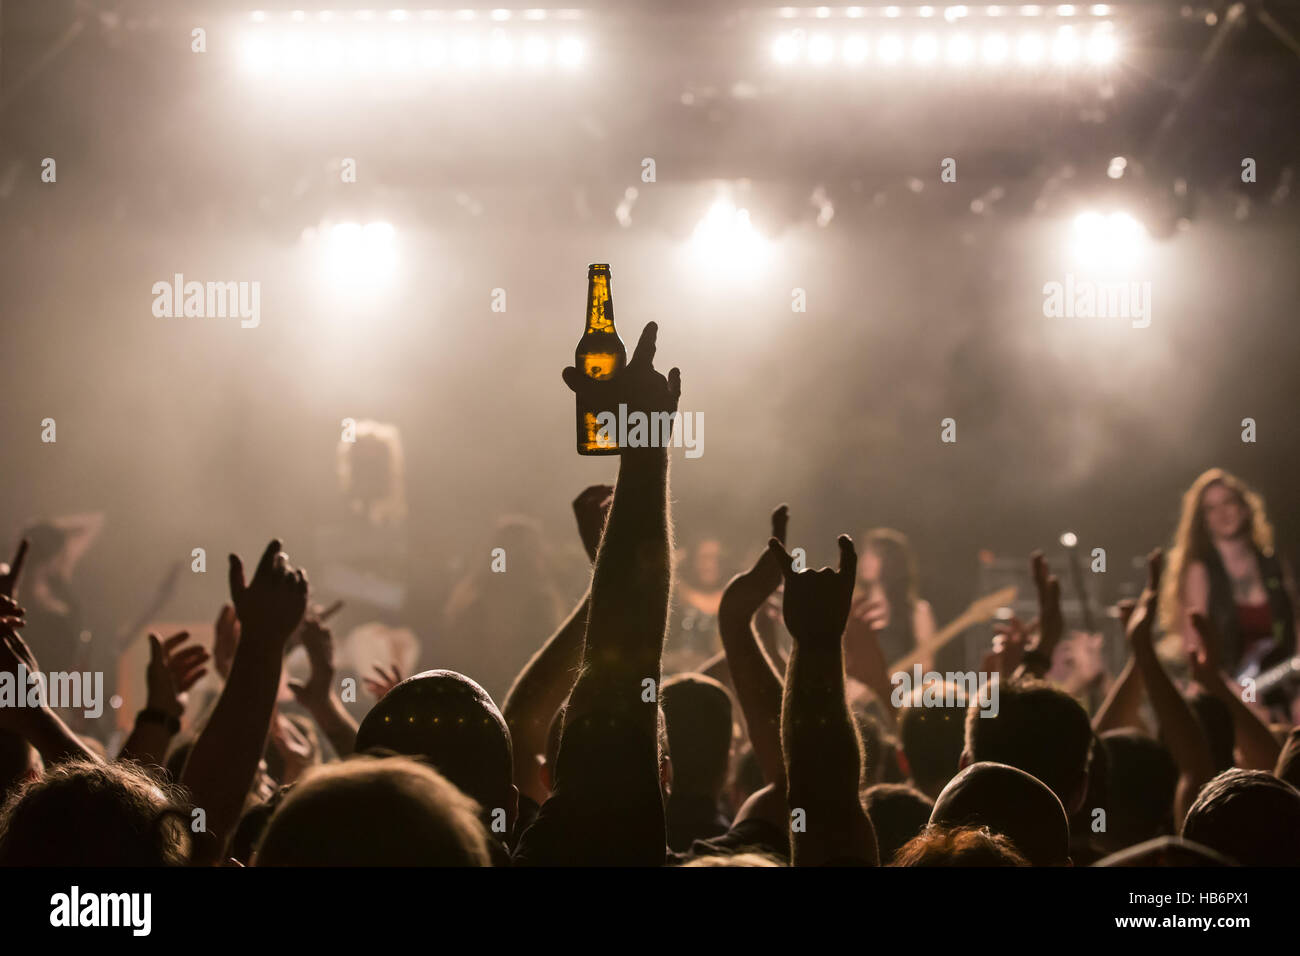 Concertgoers holding beer bottle in the air Stock Photo